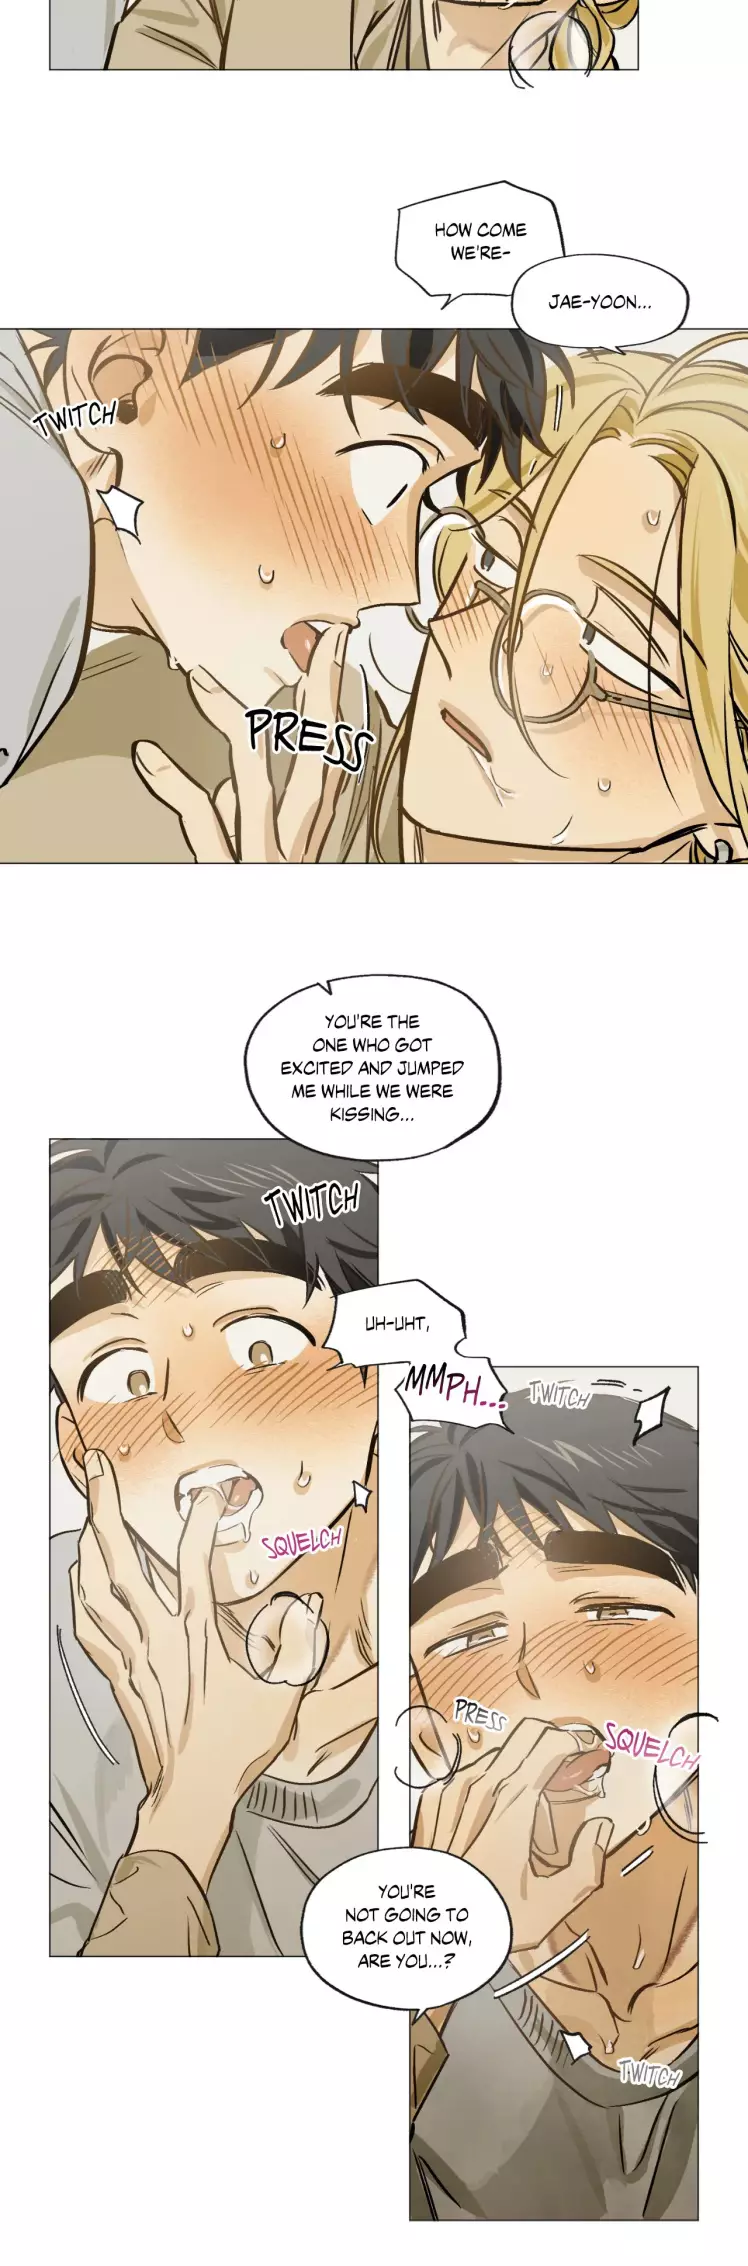 Focus On You - 22 page 18-92fb9cee